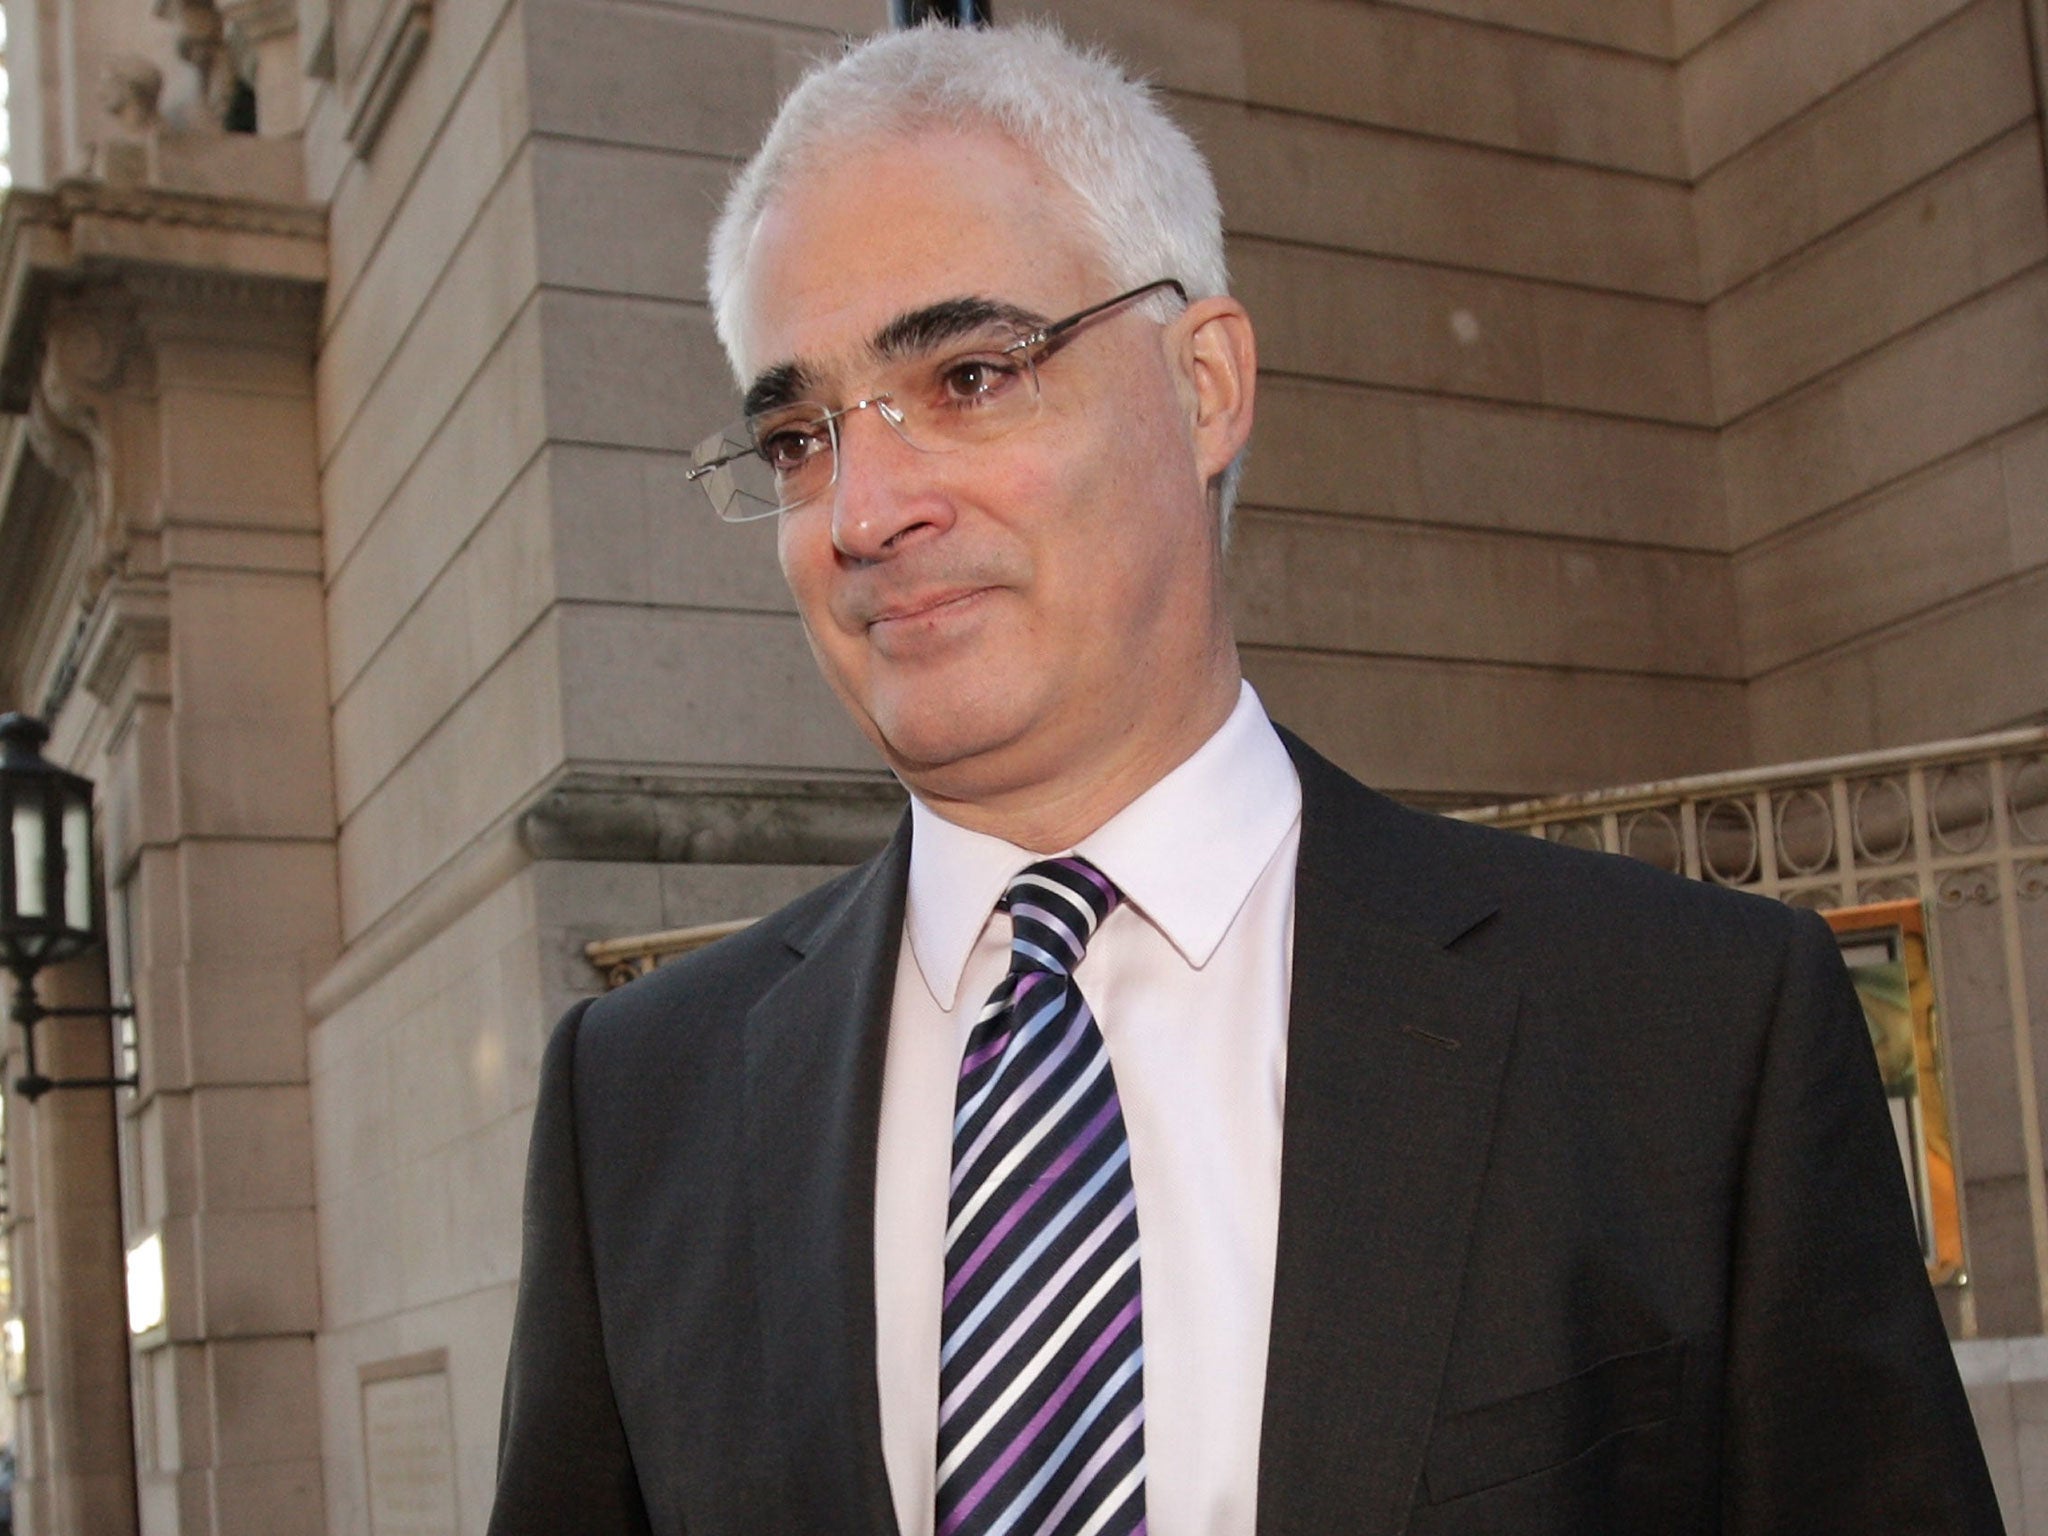 Alistair Darling has requested a meeting with Police Scotland to discuss security arrangements (Getty)